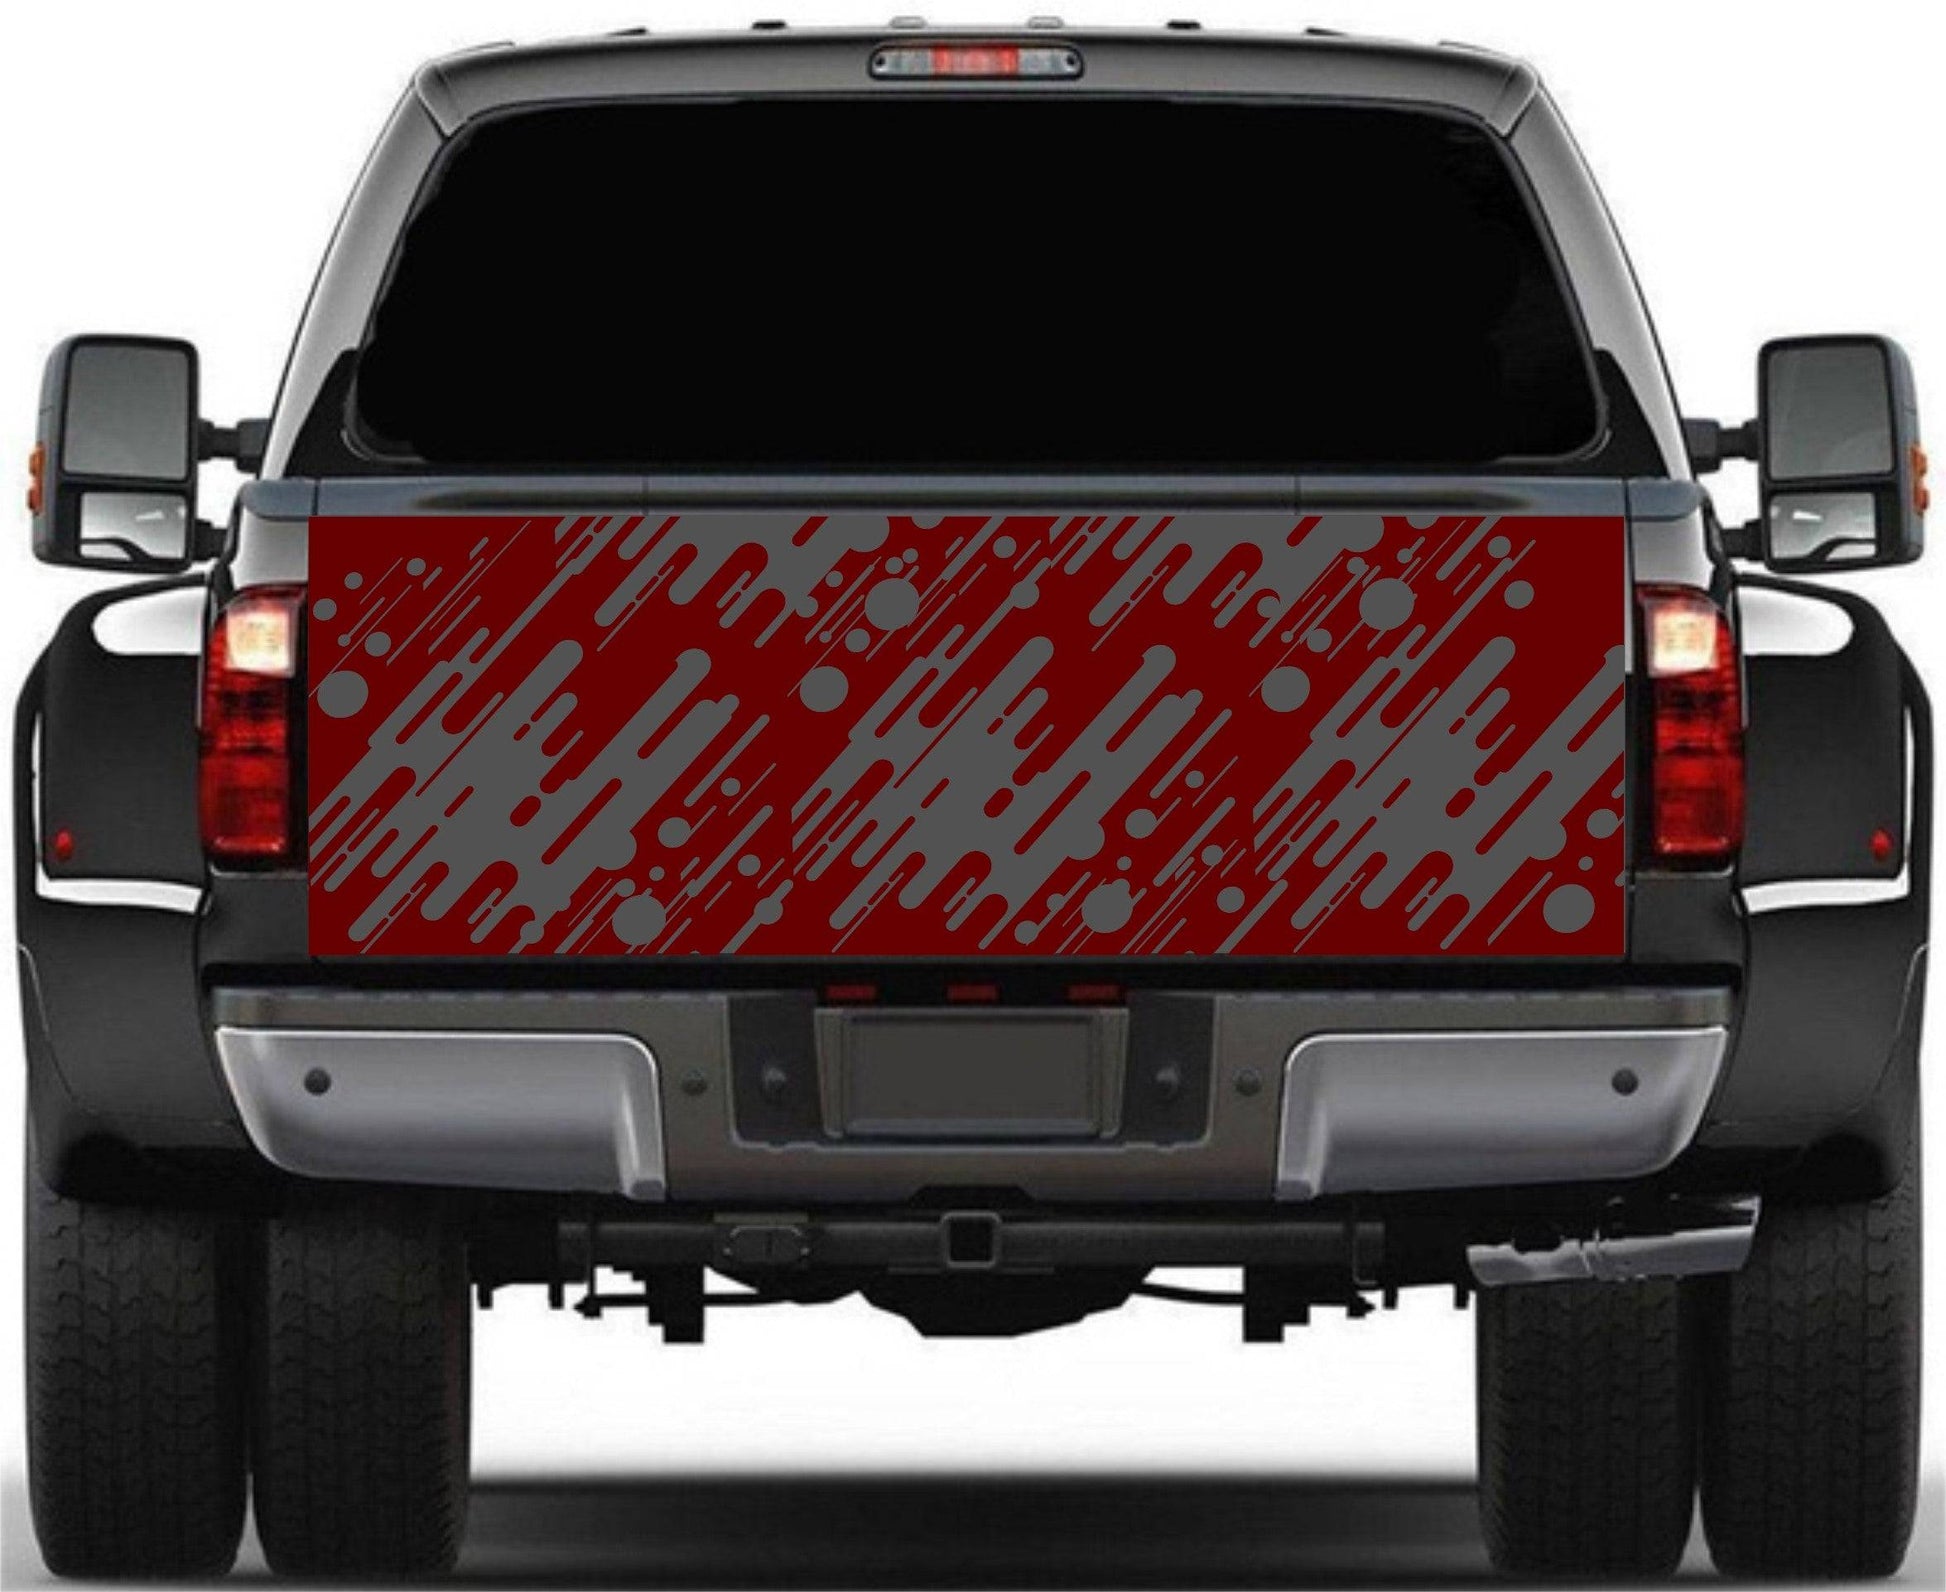 Geometric Eclectic Modern Design Cool Decals Stickers for  Any Trucks, SUV's, Vans, Tailgates, Bumpers...